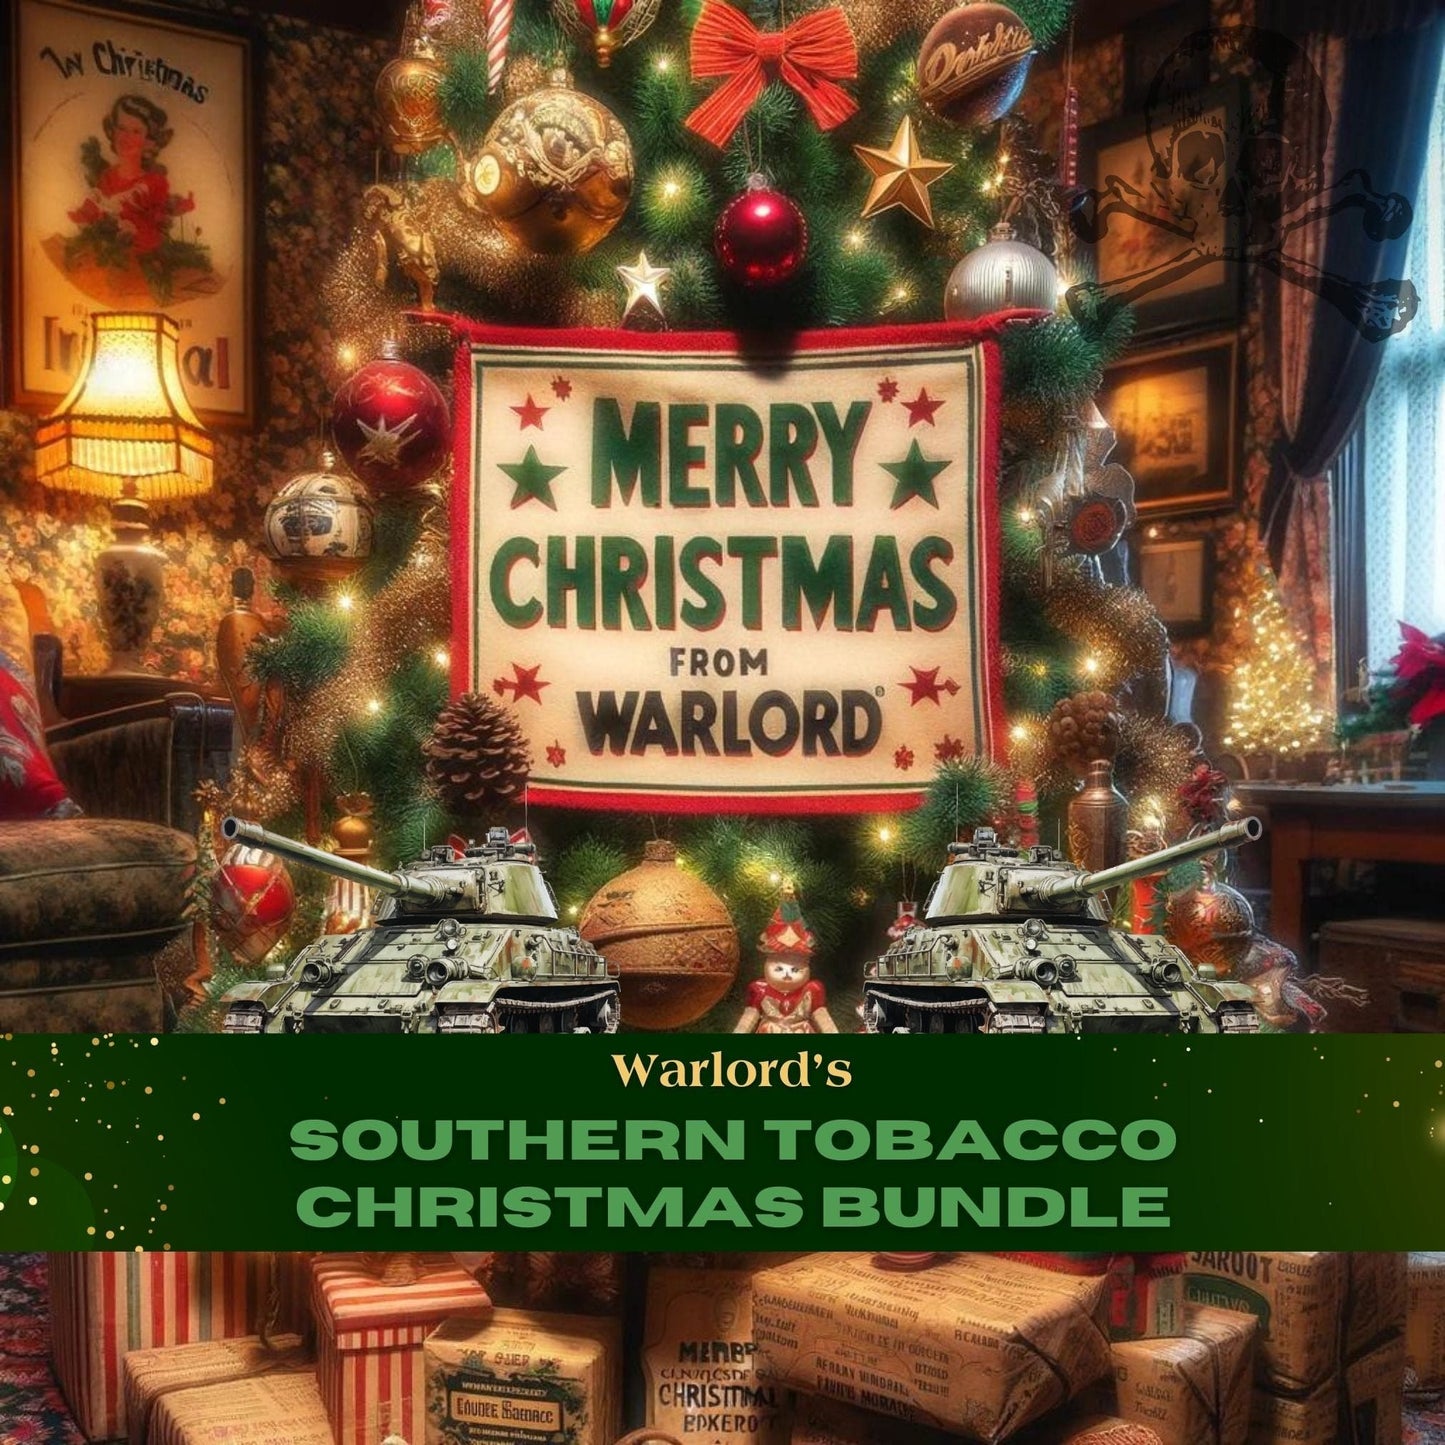 Warlord's Southern Tobacco Christmas Bundle - Warlord - Men's Grooming Essentials